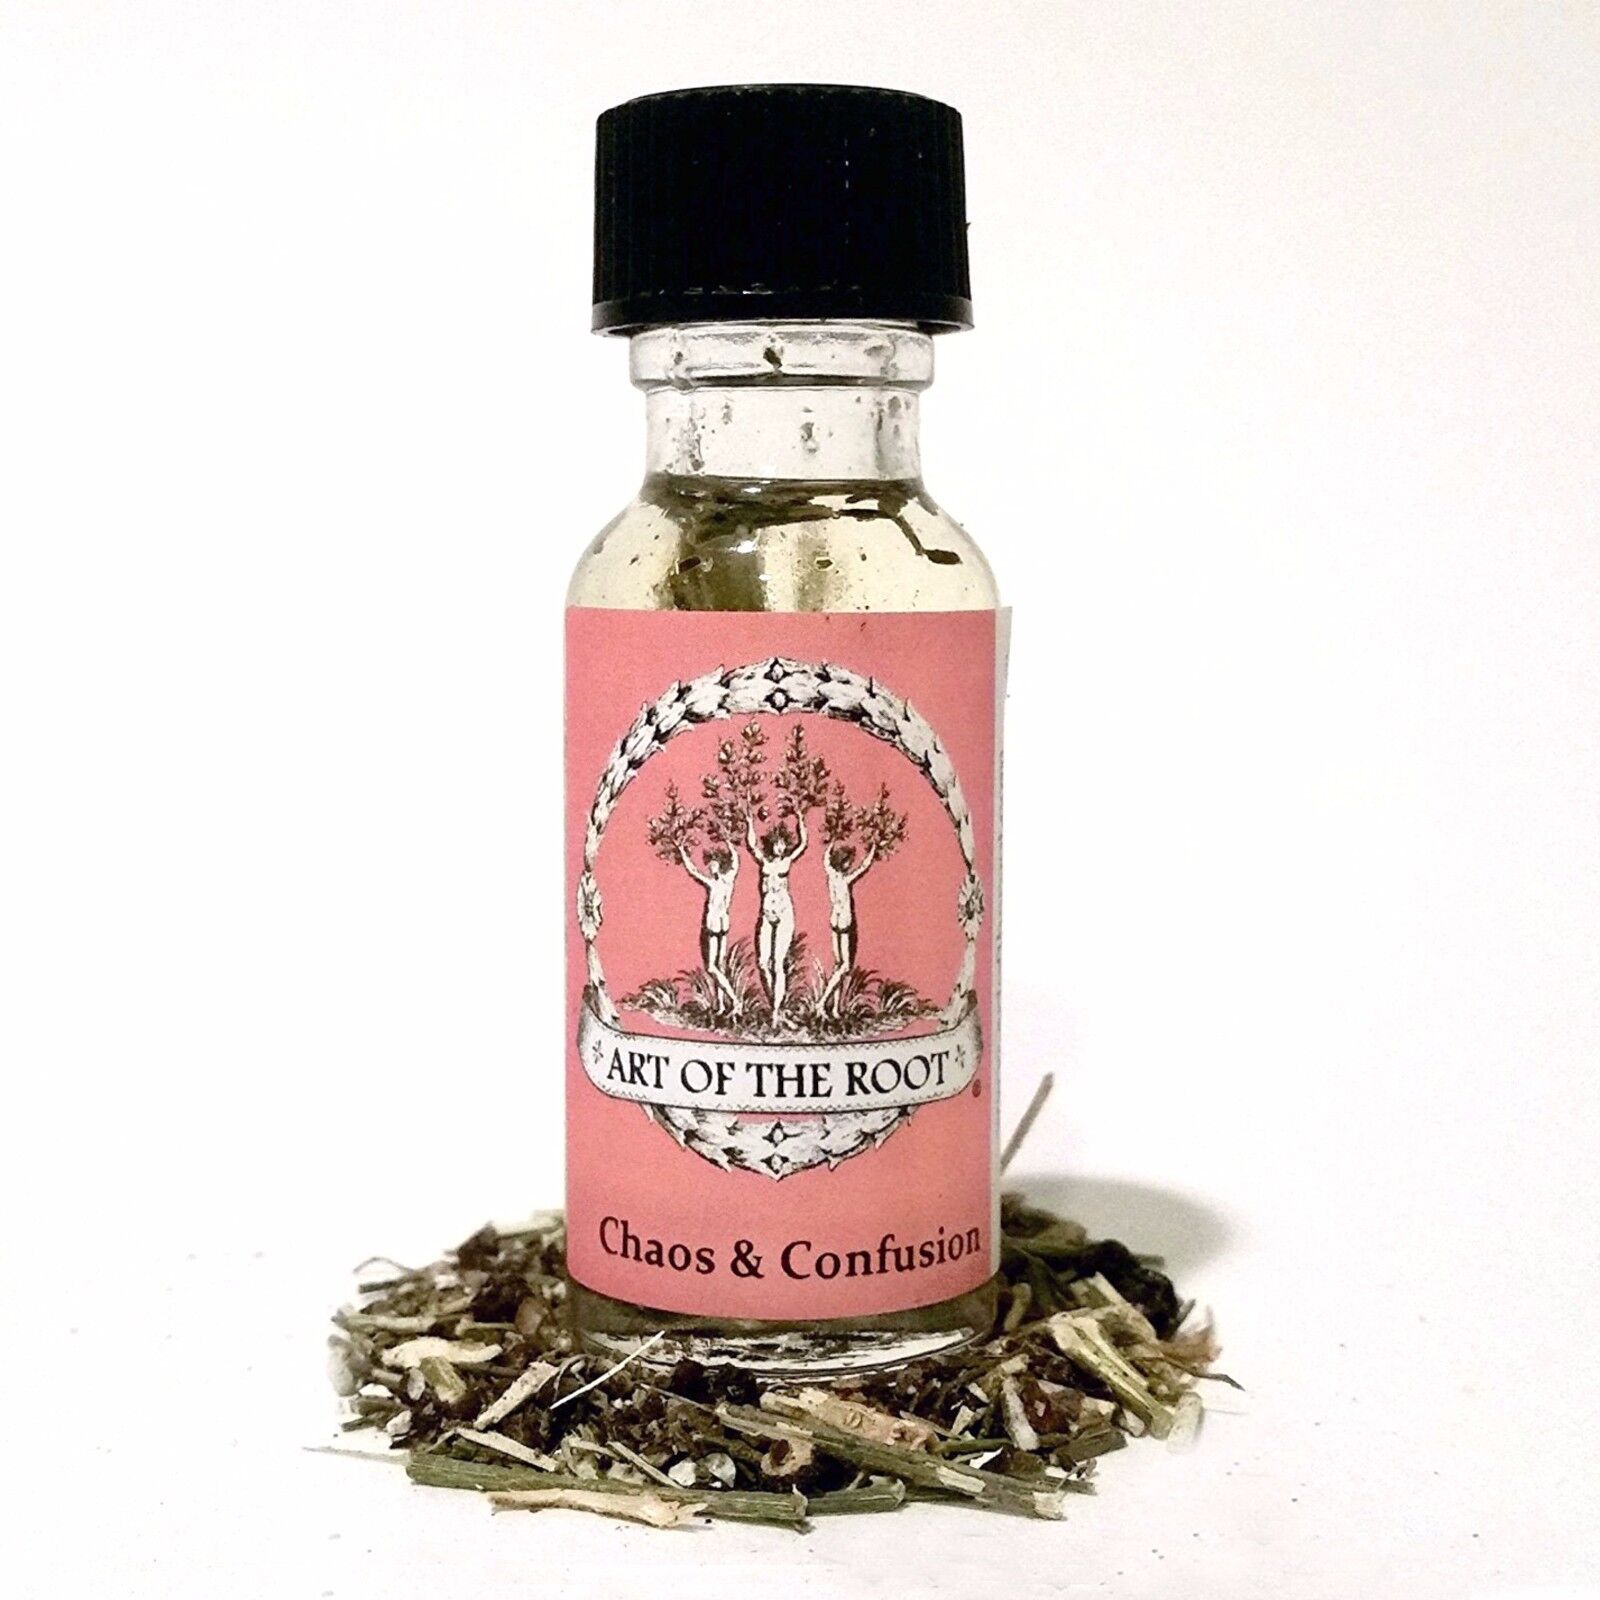 Chaos & Confusion Oil Disorient Confuse Tongue Tie Hoodoo Voodoo Wiccan Pagan